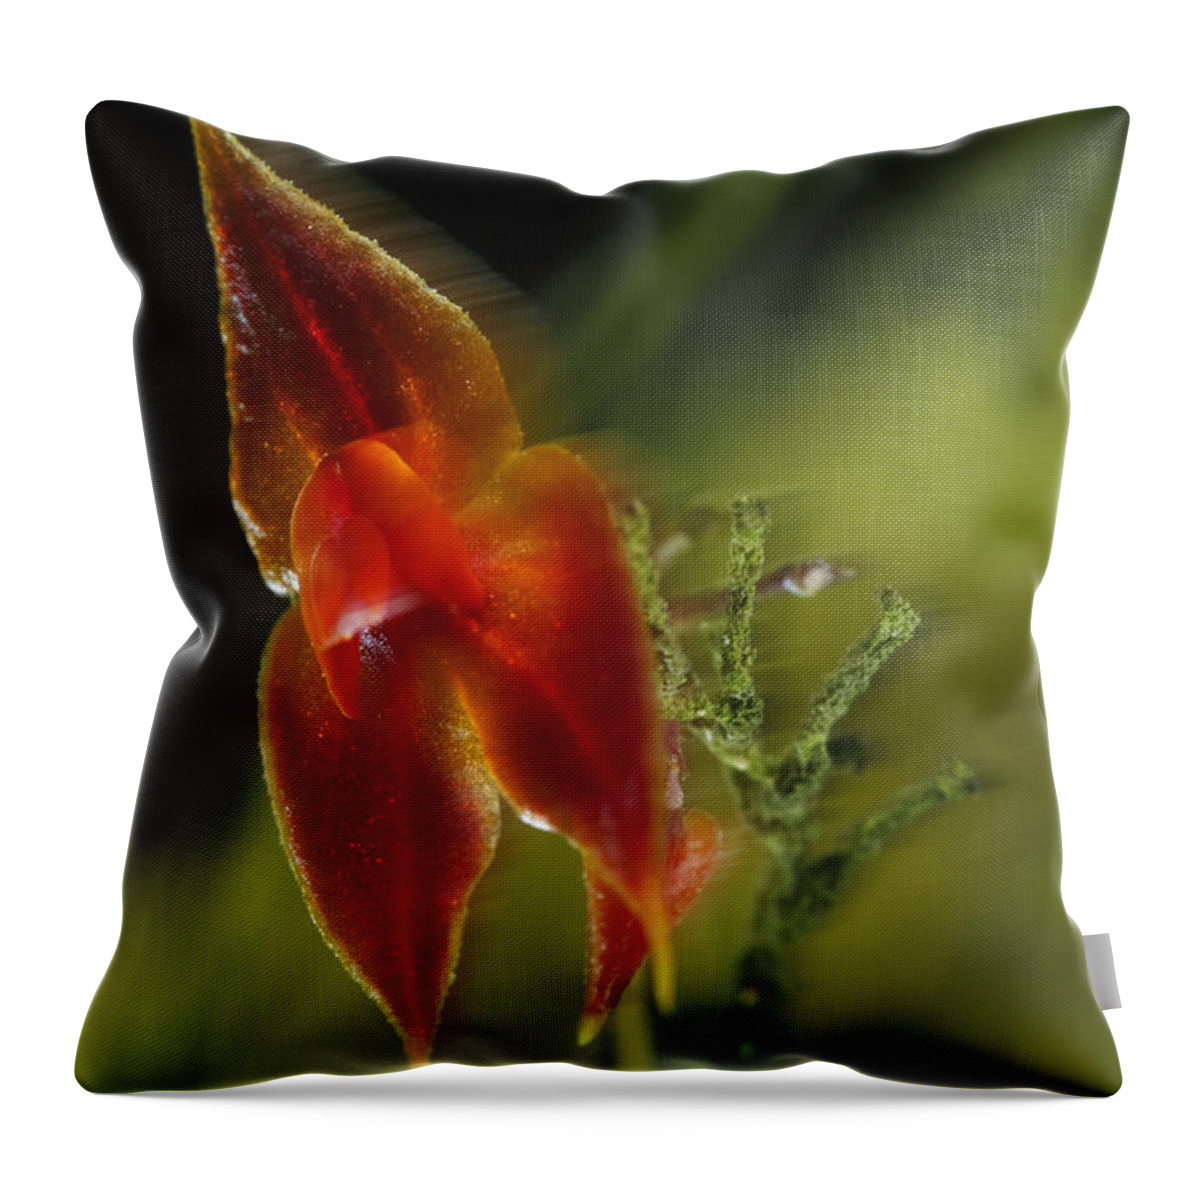 00462798 Throw Pillow featuring the photograph Orchid Panama by Christian Ziegler